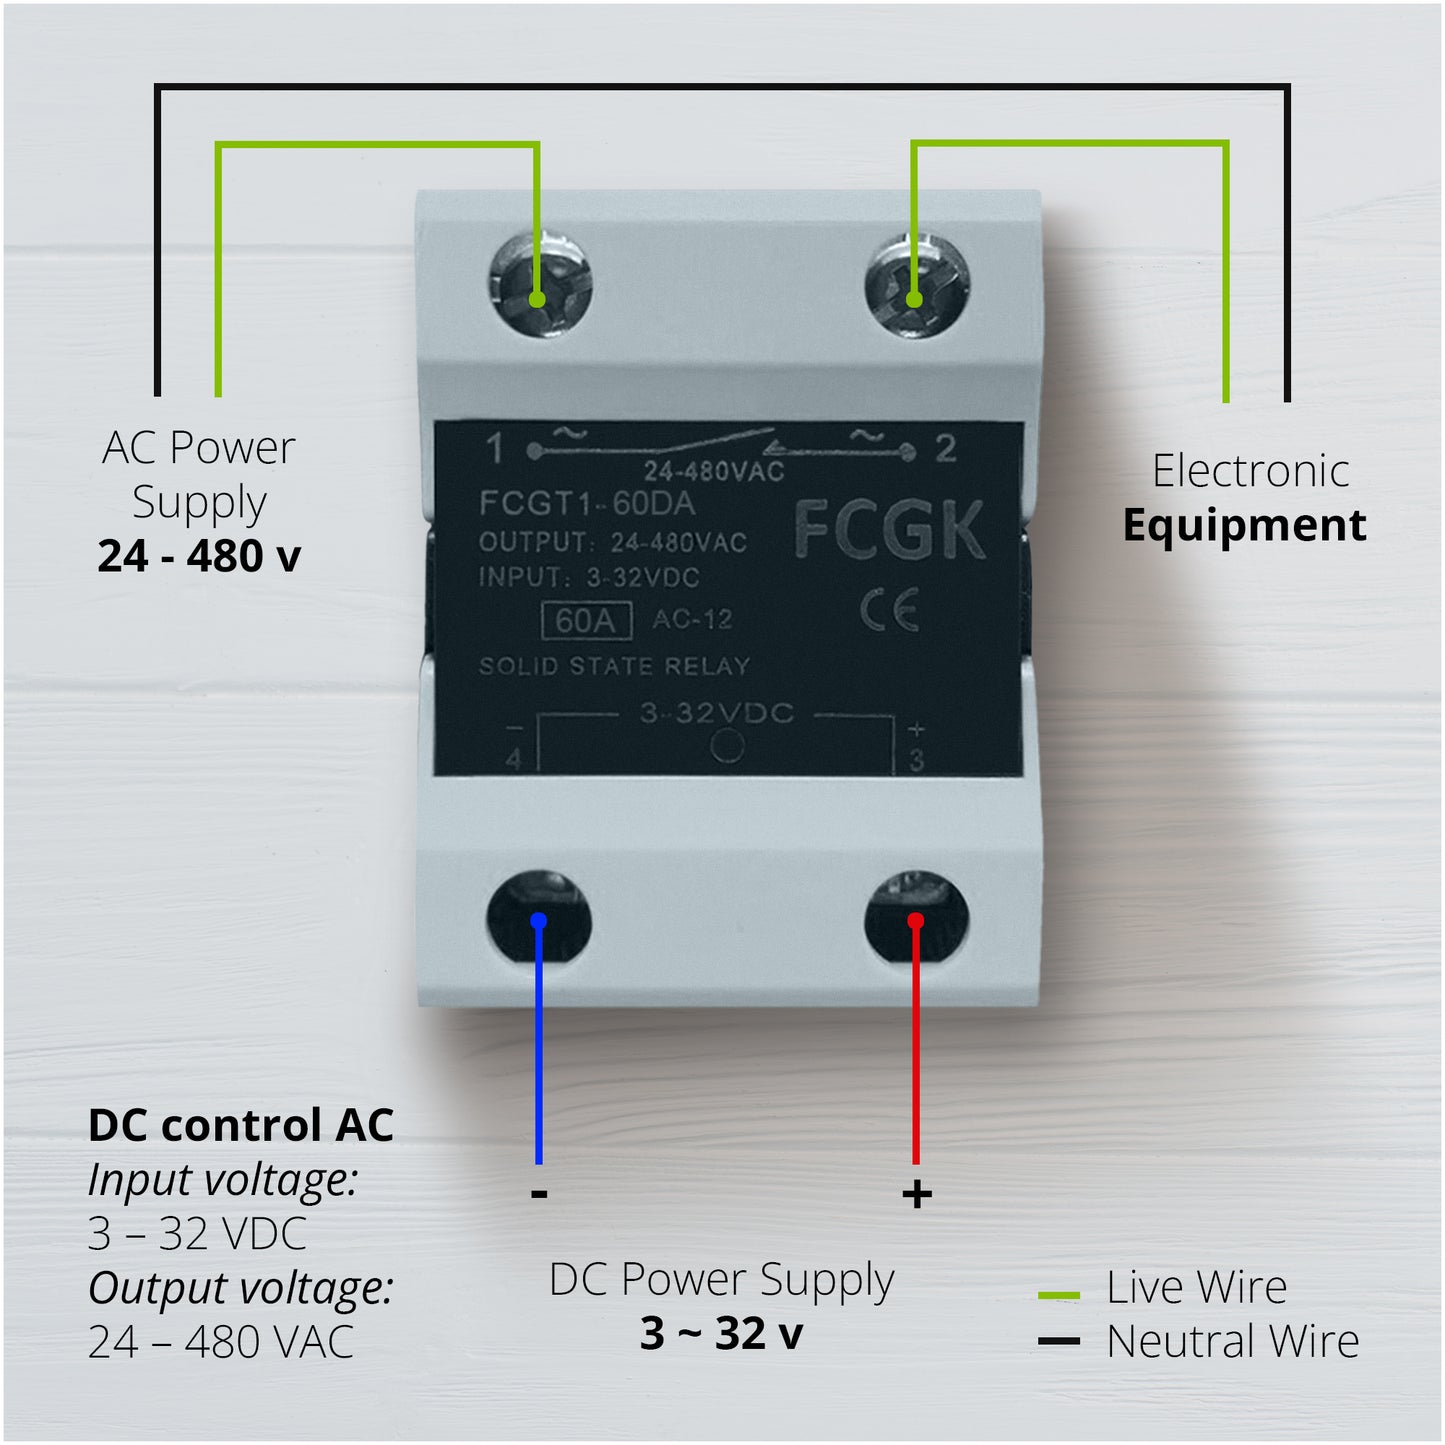 FCGK Solid State Relay SSR-60DA DC to AC Input 3-32VDC to Output 24-480VAC 60A Single Phase Plastic Cover